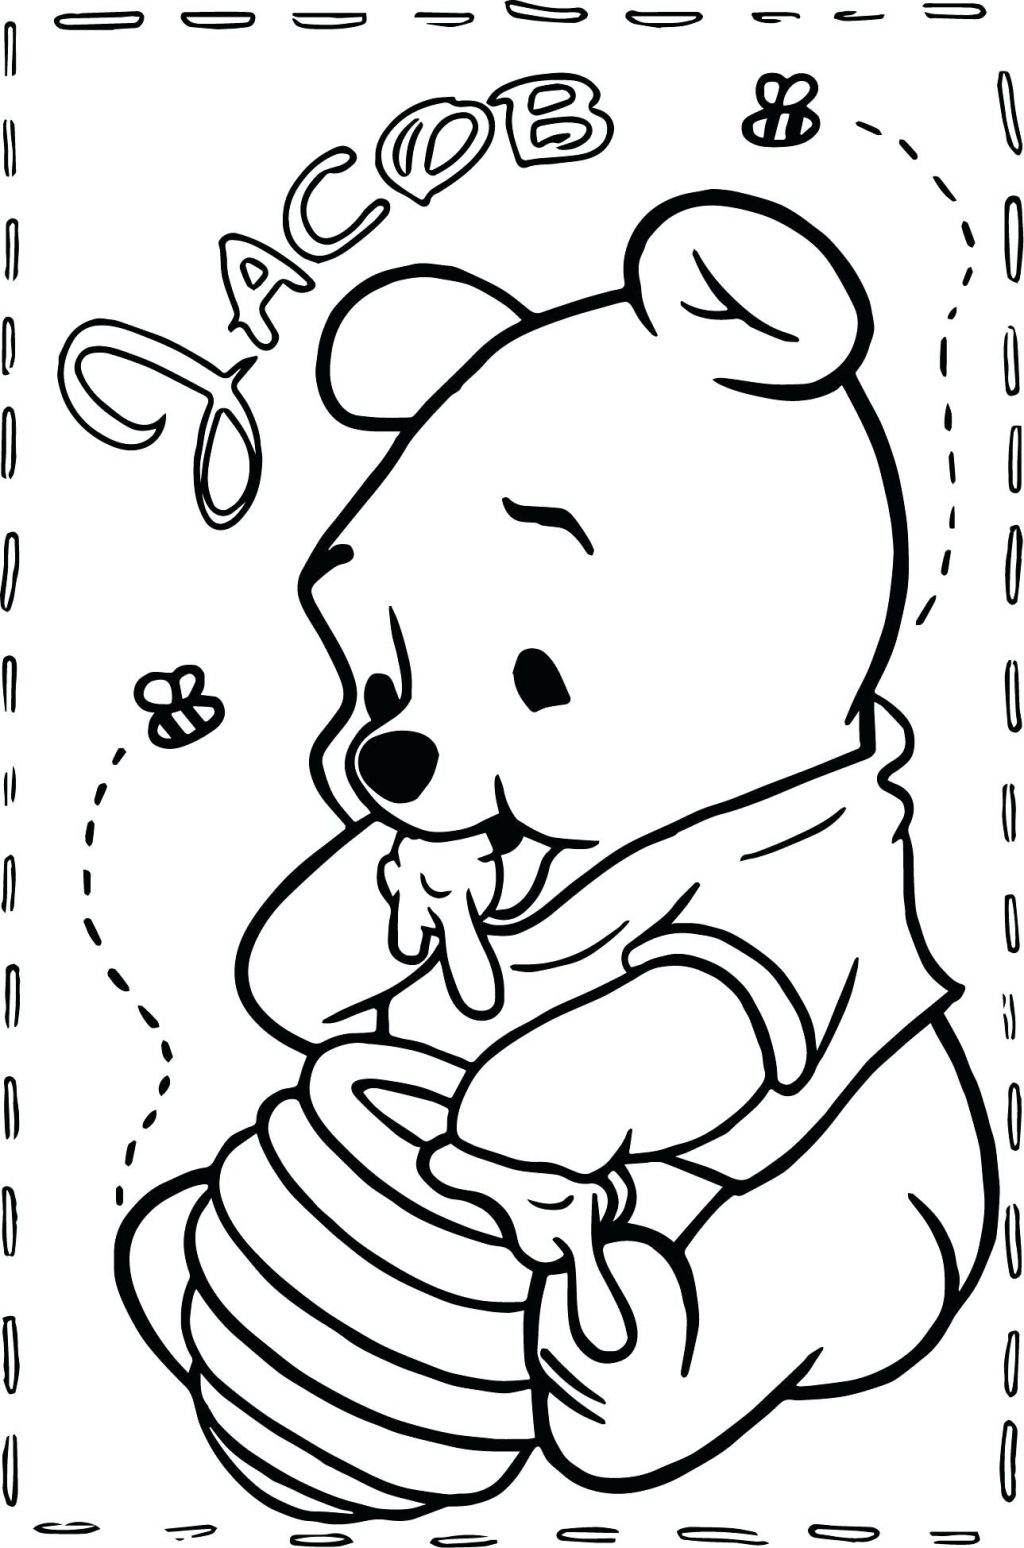 Winnie The Pooh Coloring Pages Pdf at GetDrawings | Free download